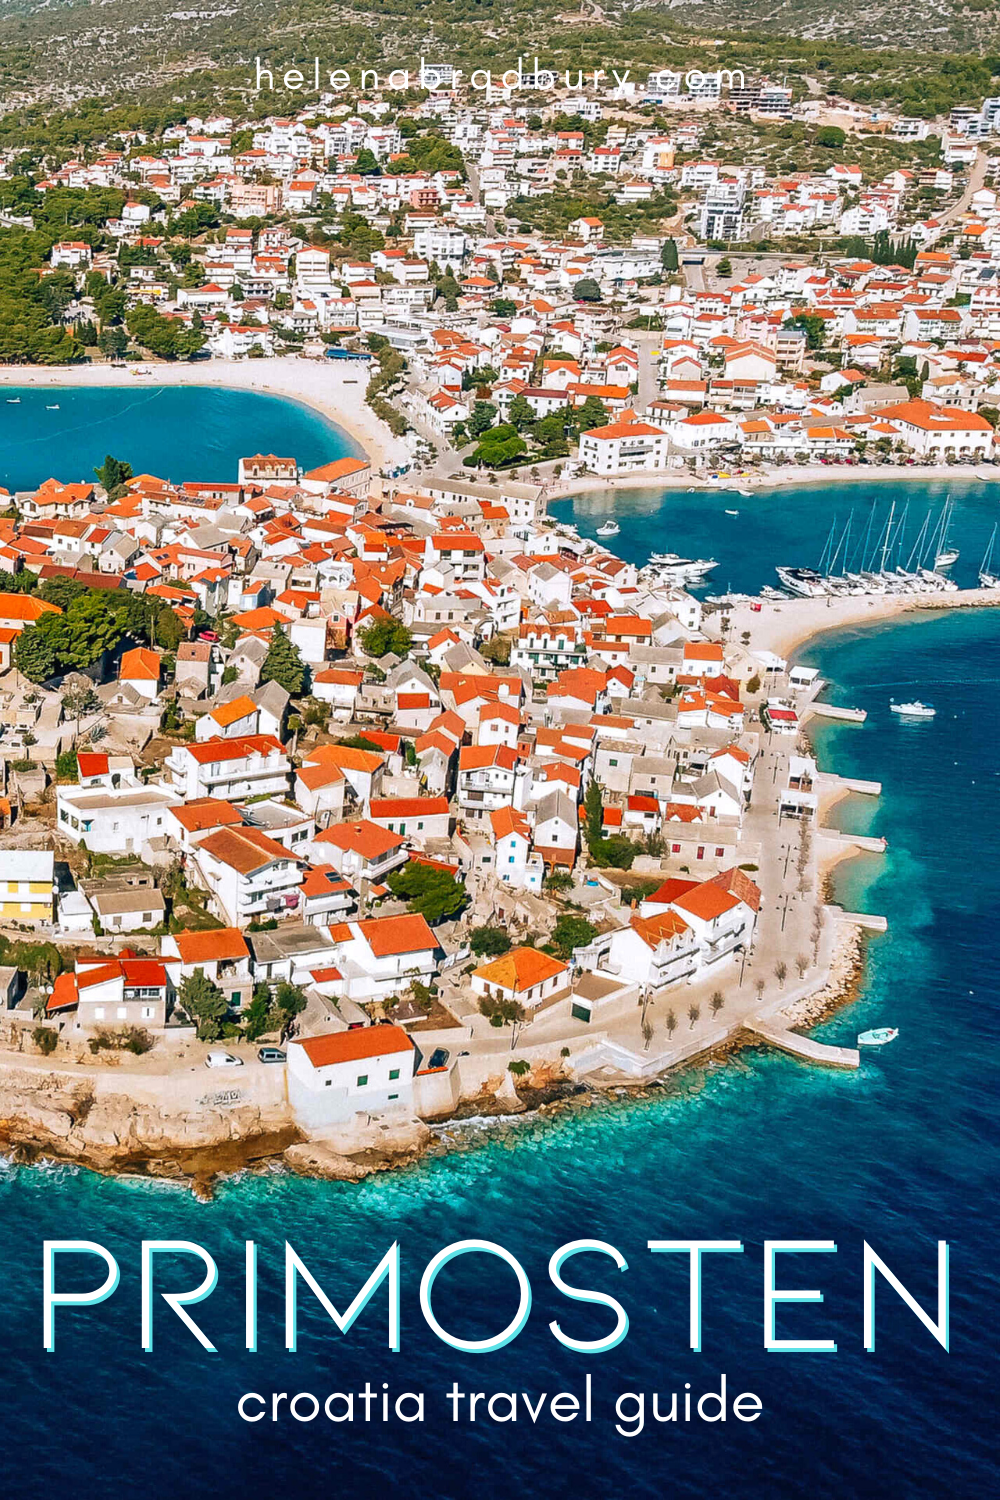 A true Croatia hidden gem! Discover the best things to do in Primosten and experience a more authentic part of Croatia just 1 hour from Split | primosten croatia things to do | primosten things to do | primosten kroatien | primosten croatia villas |